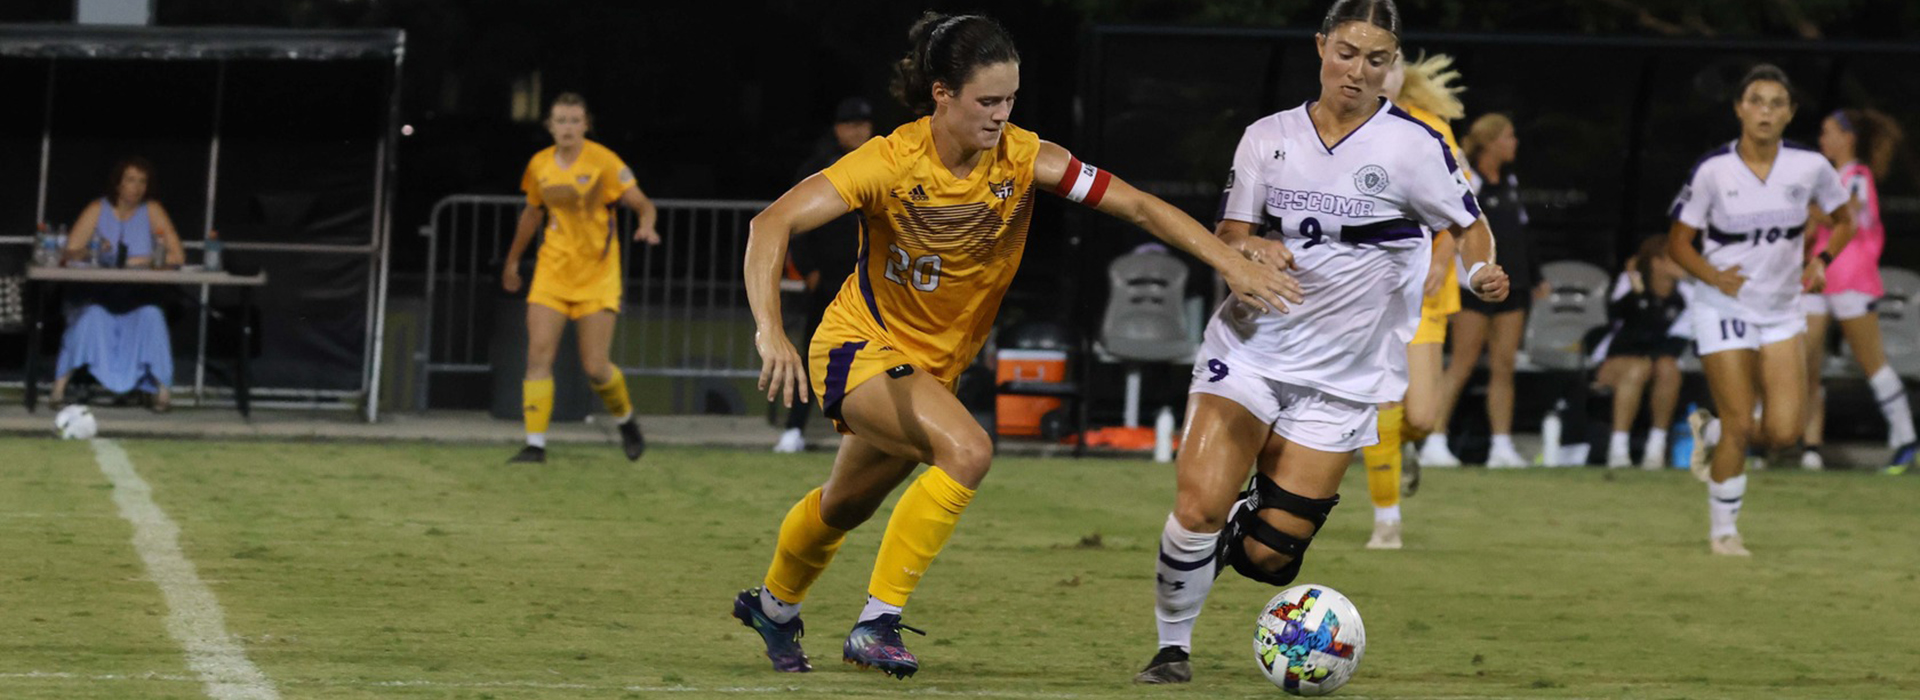 Golden Eagles unwrap OVC play with 3-0 victory at Lindenwood